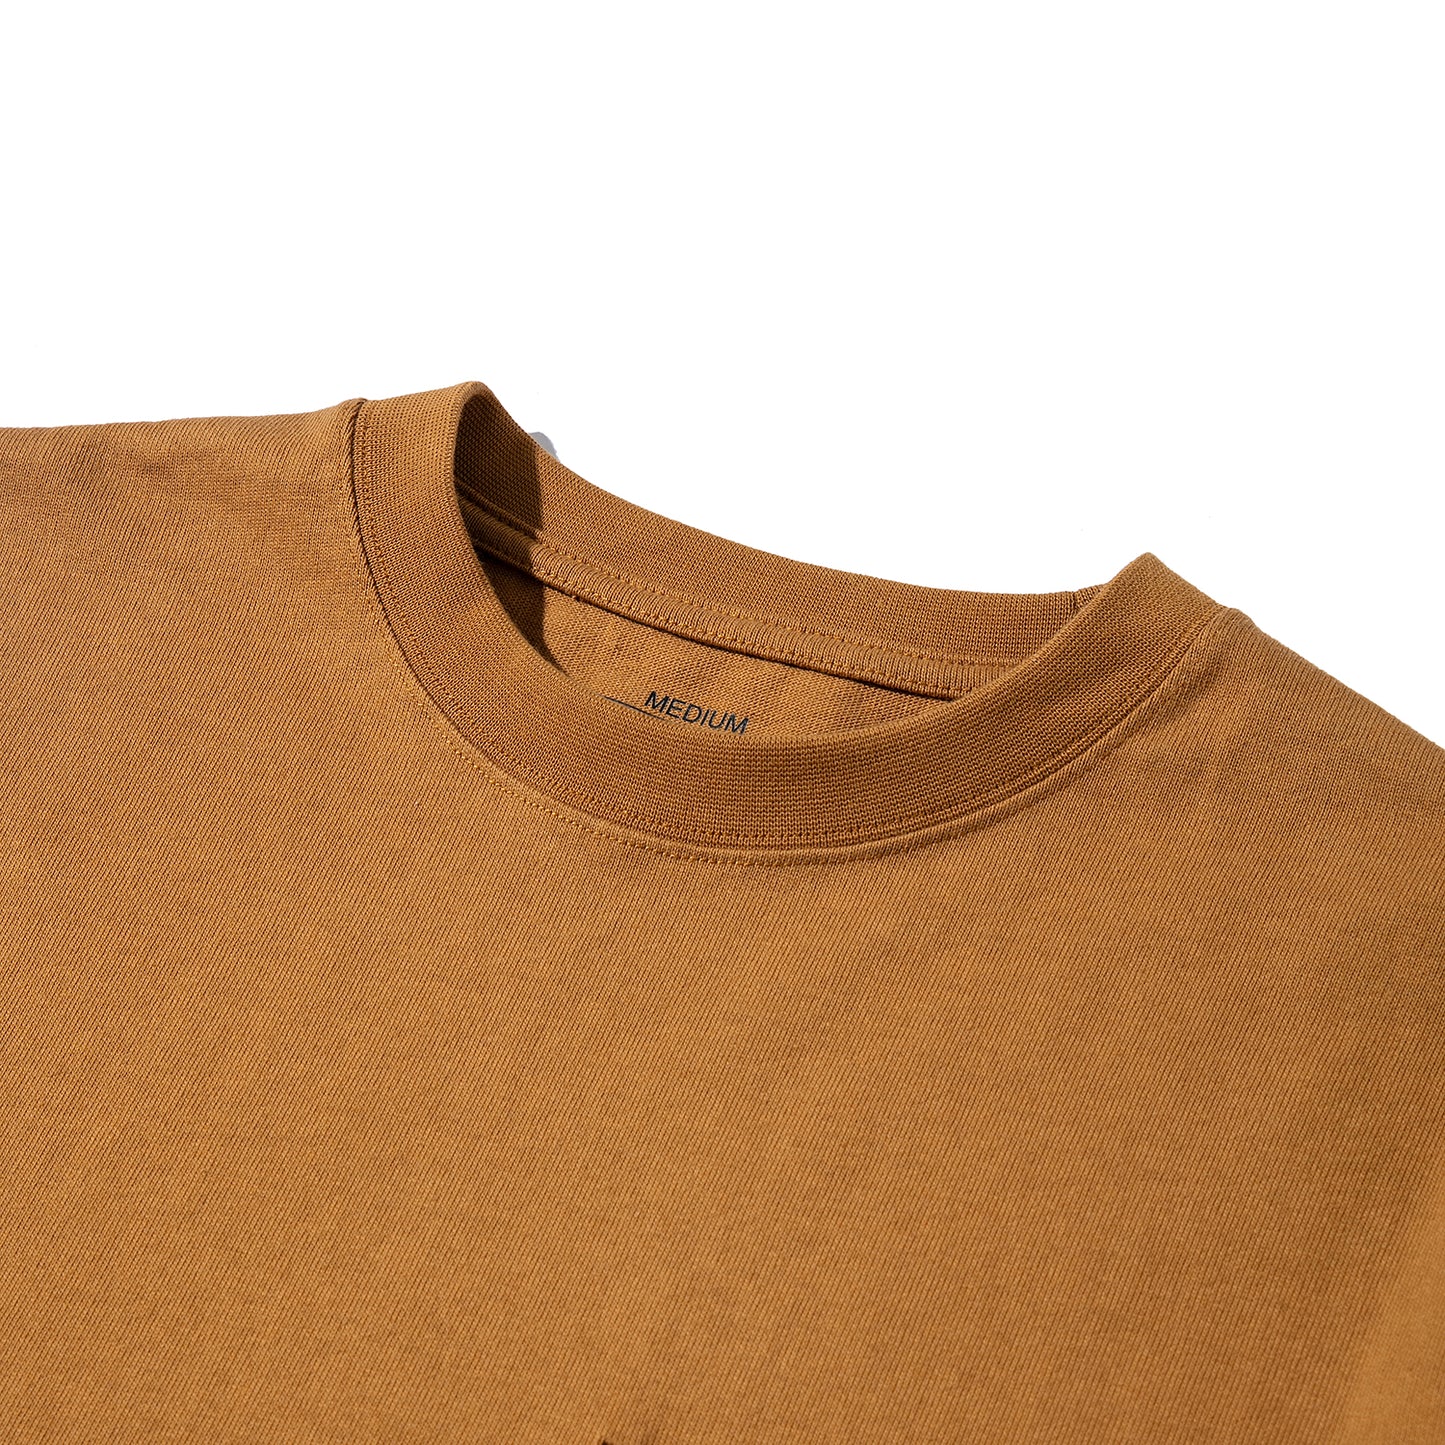 Long-sleeved letter-printed round neck T-shirt with chest pocket in Khaki